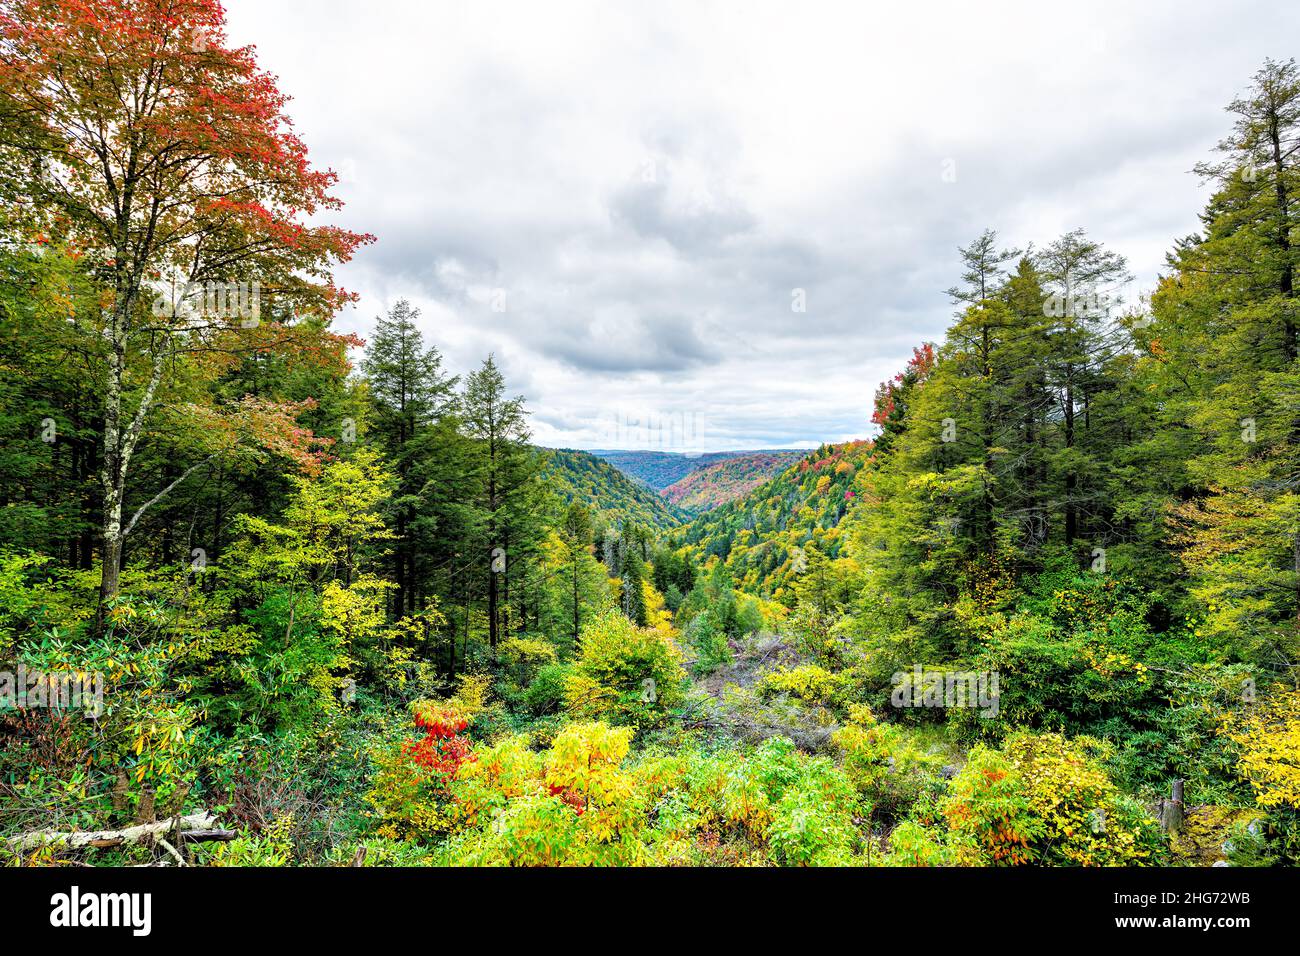 Allegheny mountains in autumn fall season with green foliage turning gold red and yellow at Lindy Point overlook in Blackwater Falls State Park in Wes Stock Photo